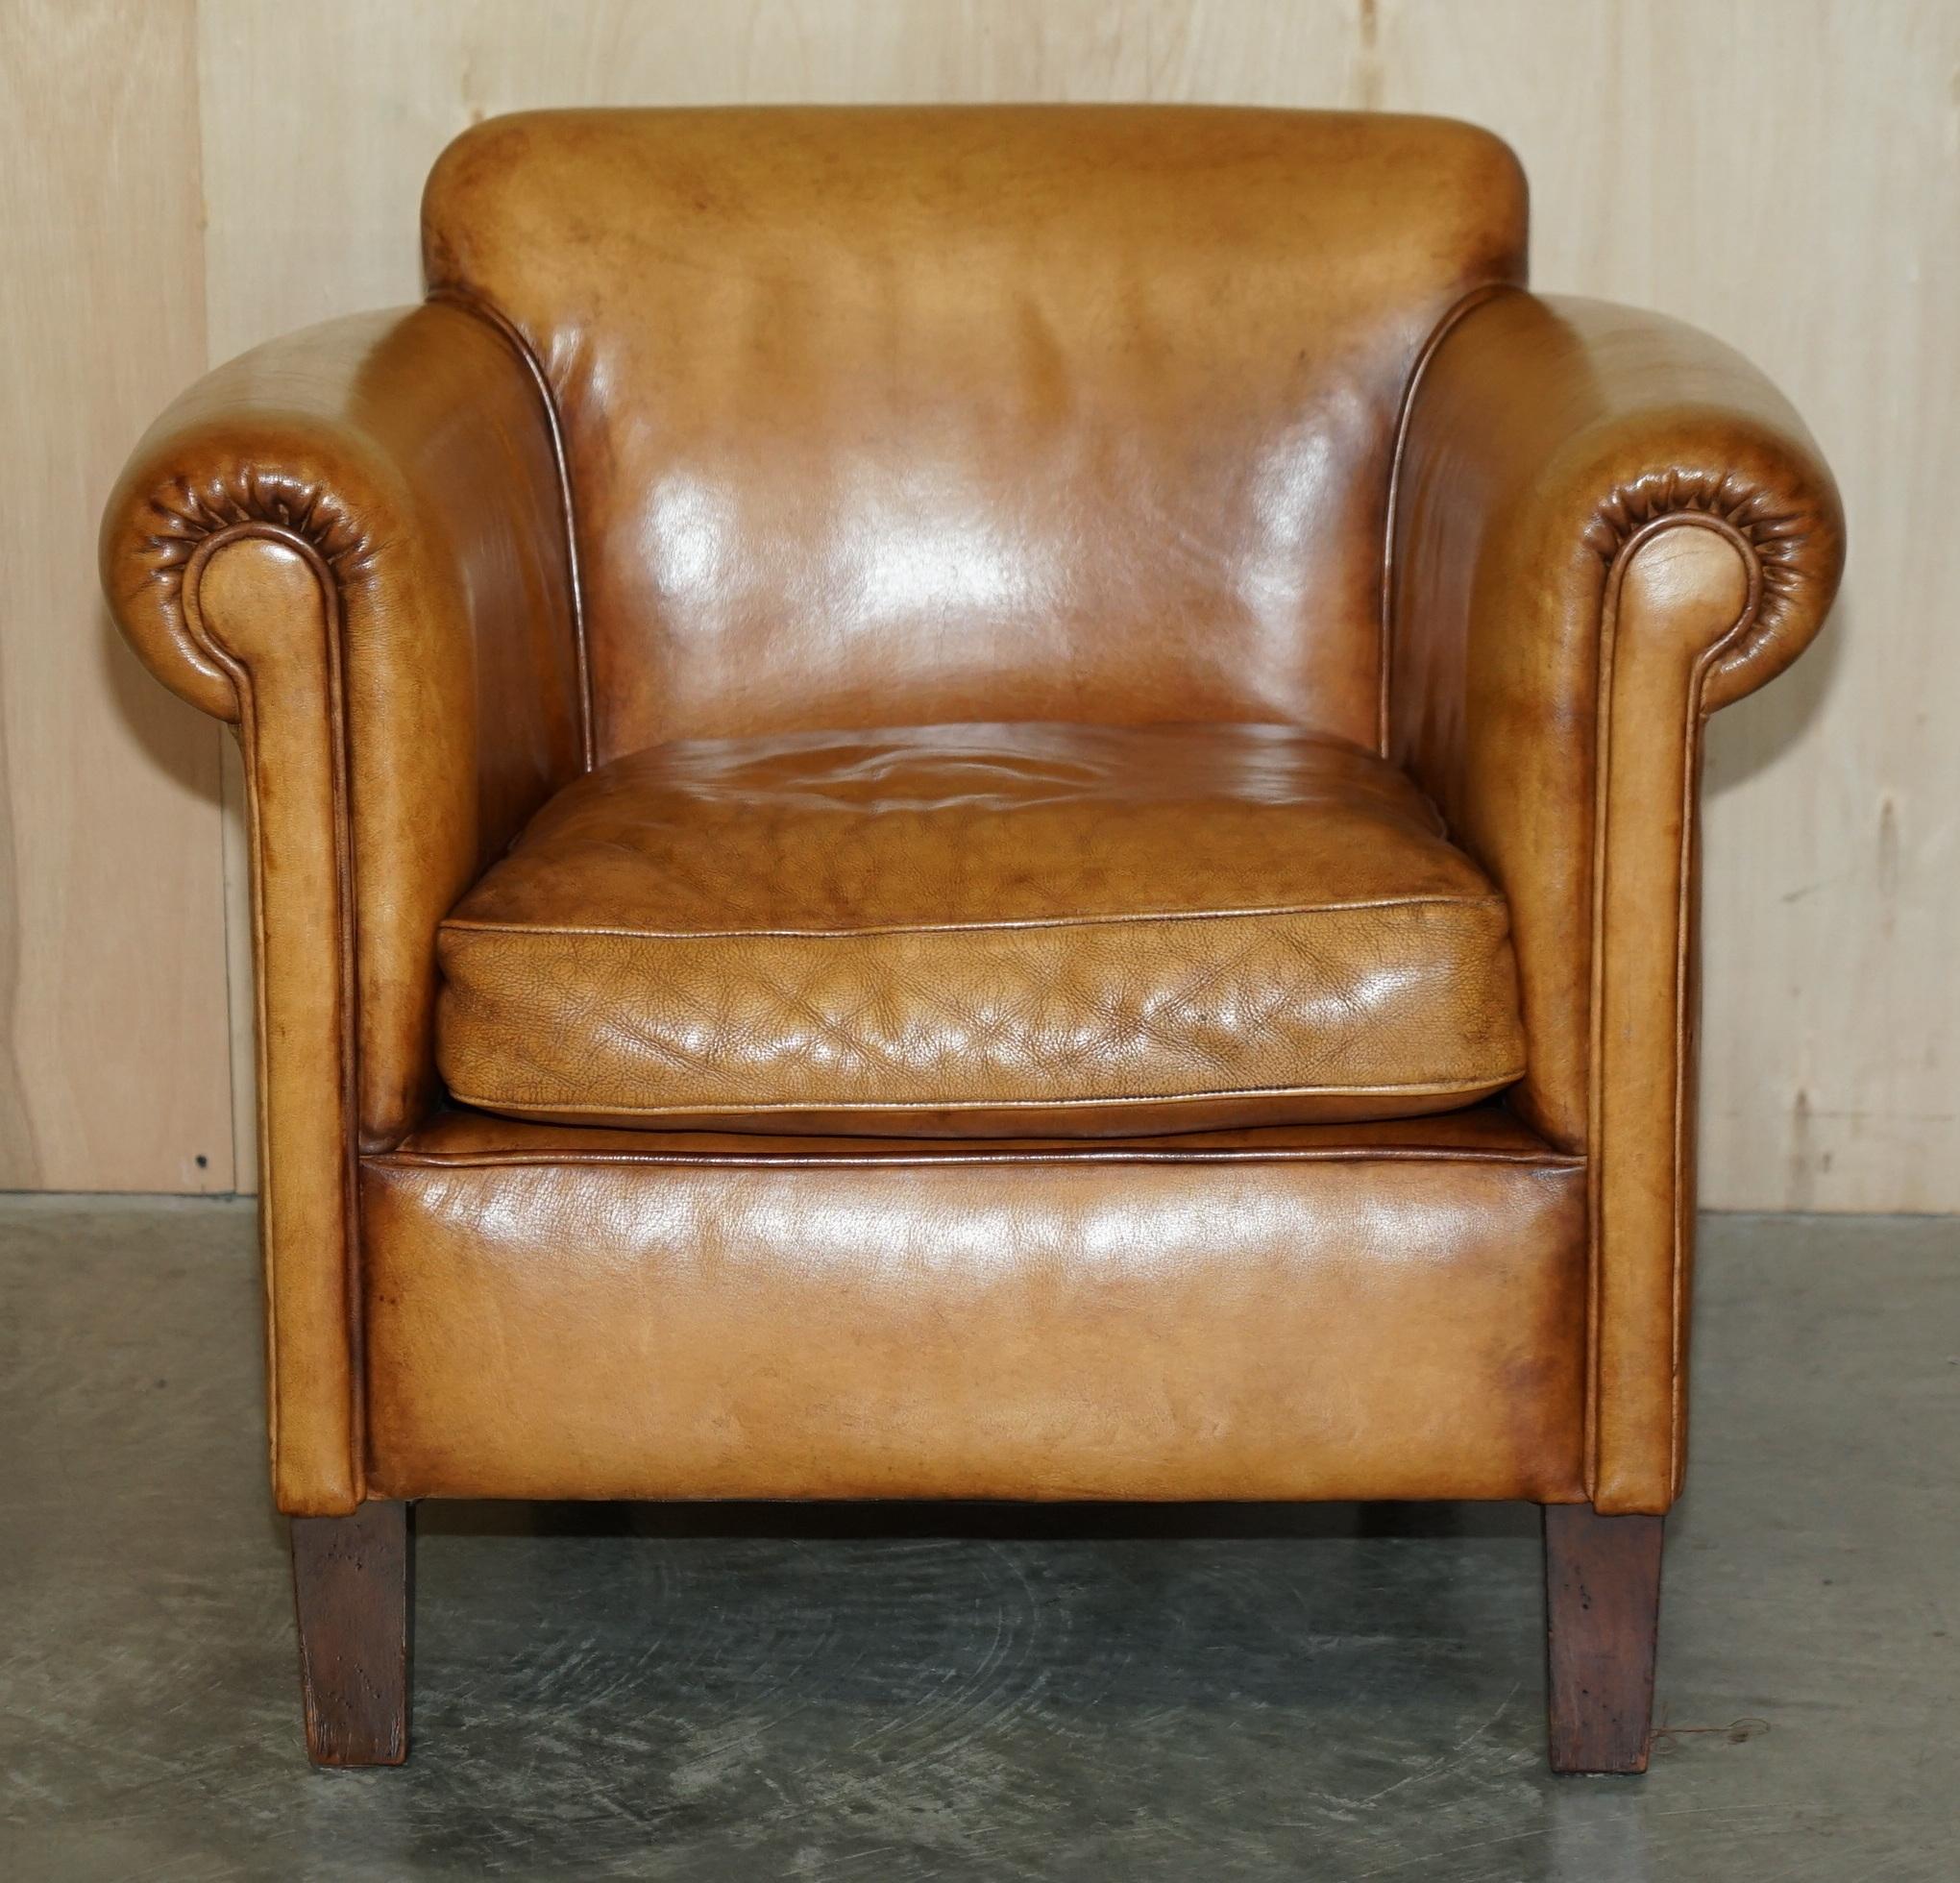 Hand-Crafted Rare John Lewis Camford Heritage Brown Leather Armchair & Two Seat Sofa Suite For Sale